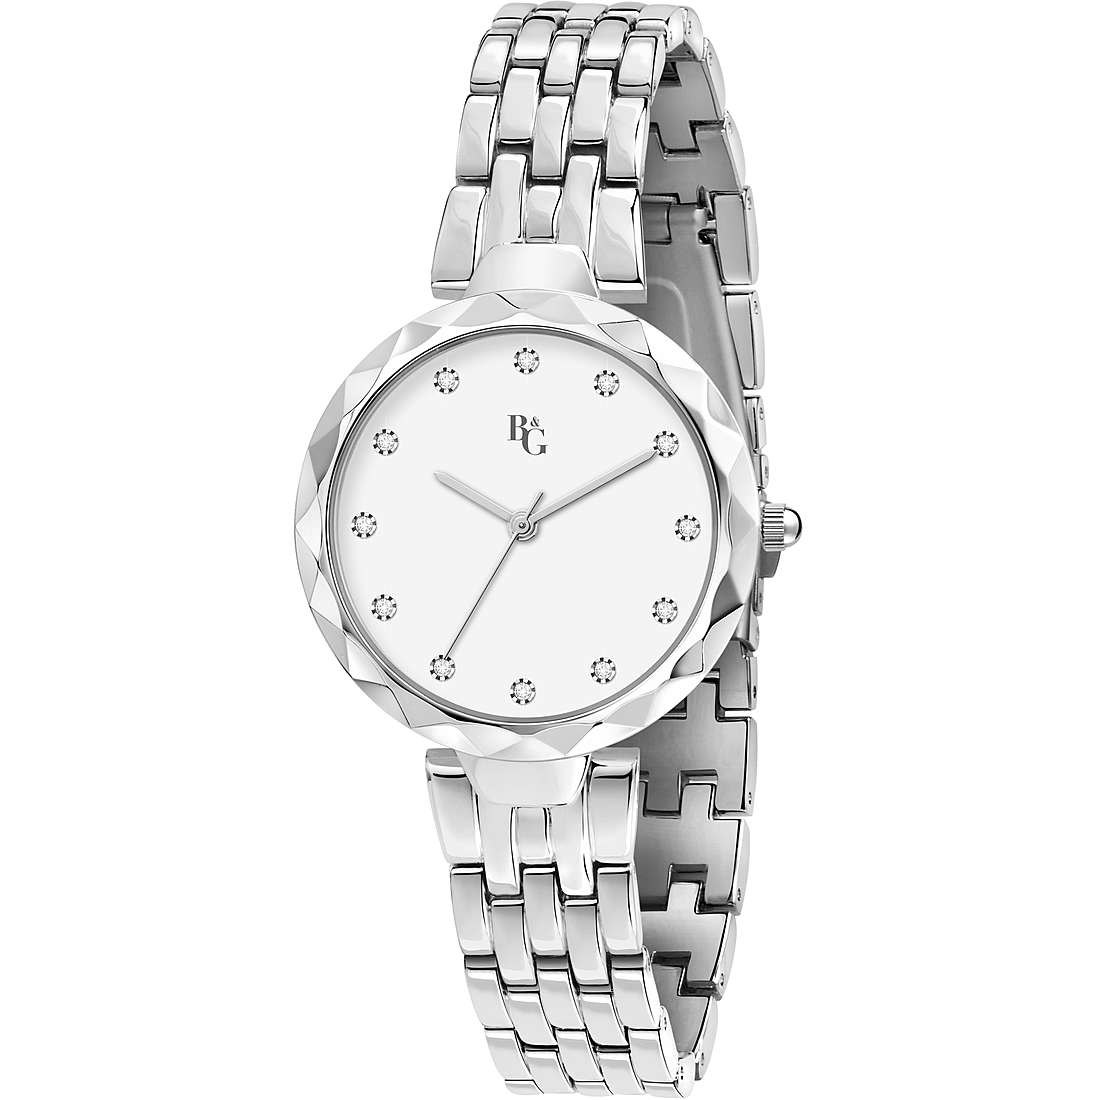 only time watch Metal White dial woman Arcade R3853289504